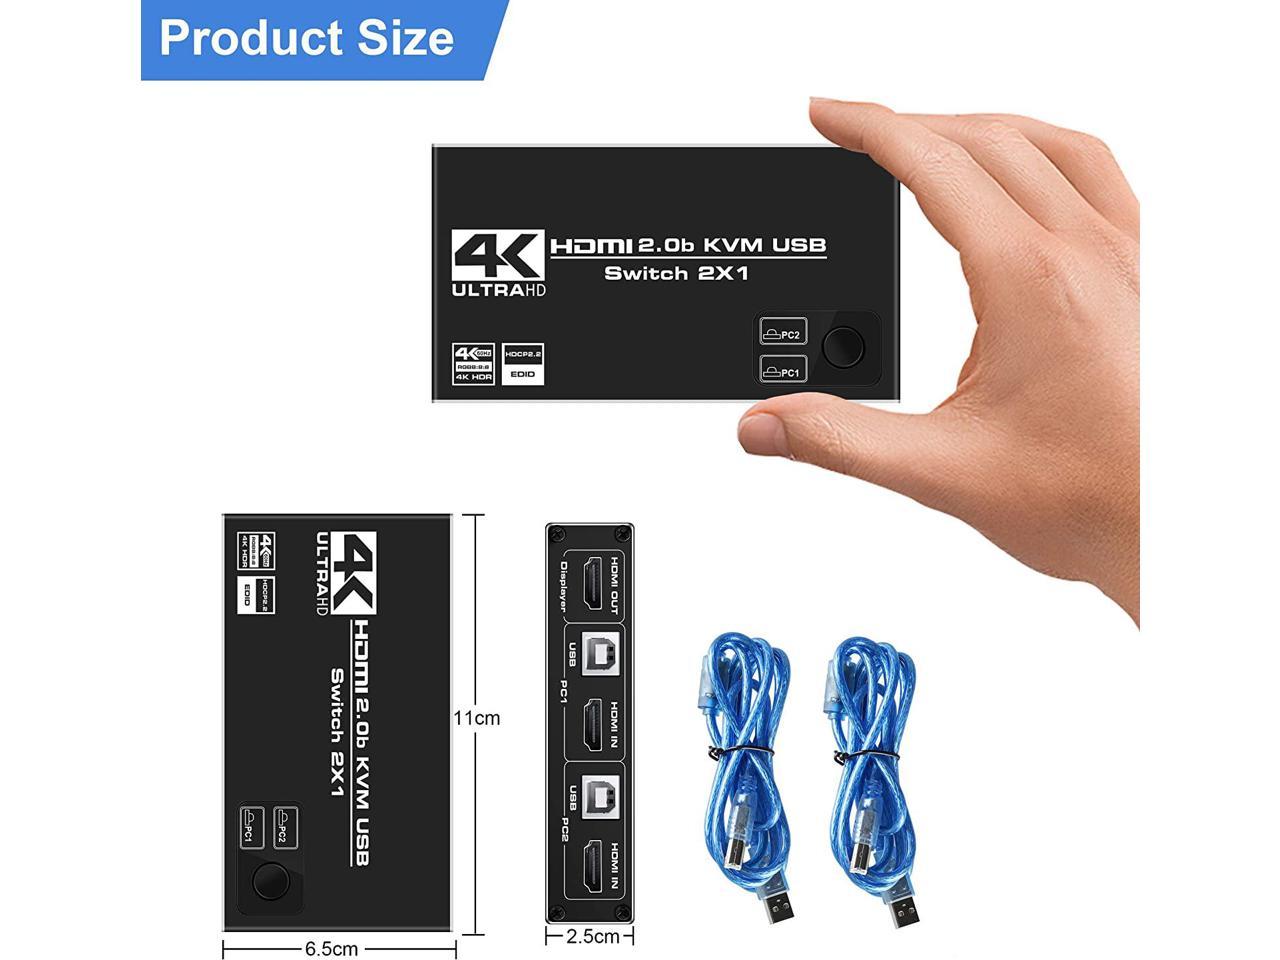 HF-HKU212: HDMI KVM Switch, 4K@60Hz USB Switch 2x1 HDMI2.0 Ports + 3X USB KVM Ports, Share 2 Computers to one Monitor, Support Wireless Keyboard and Mouse, USB Disk, Printer, USB Camera